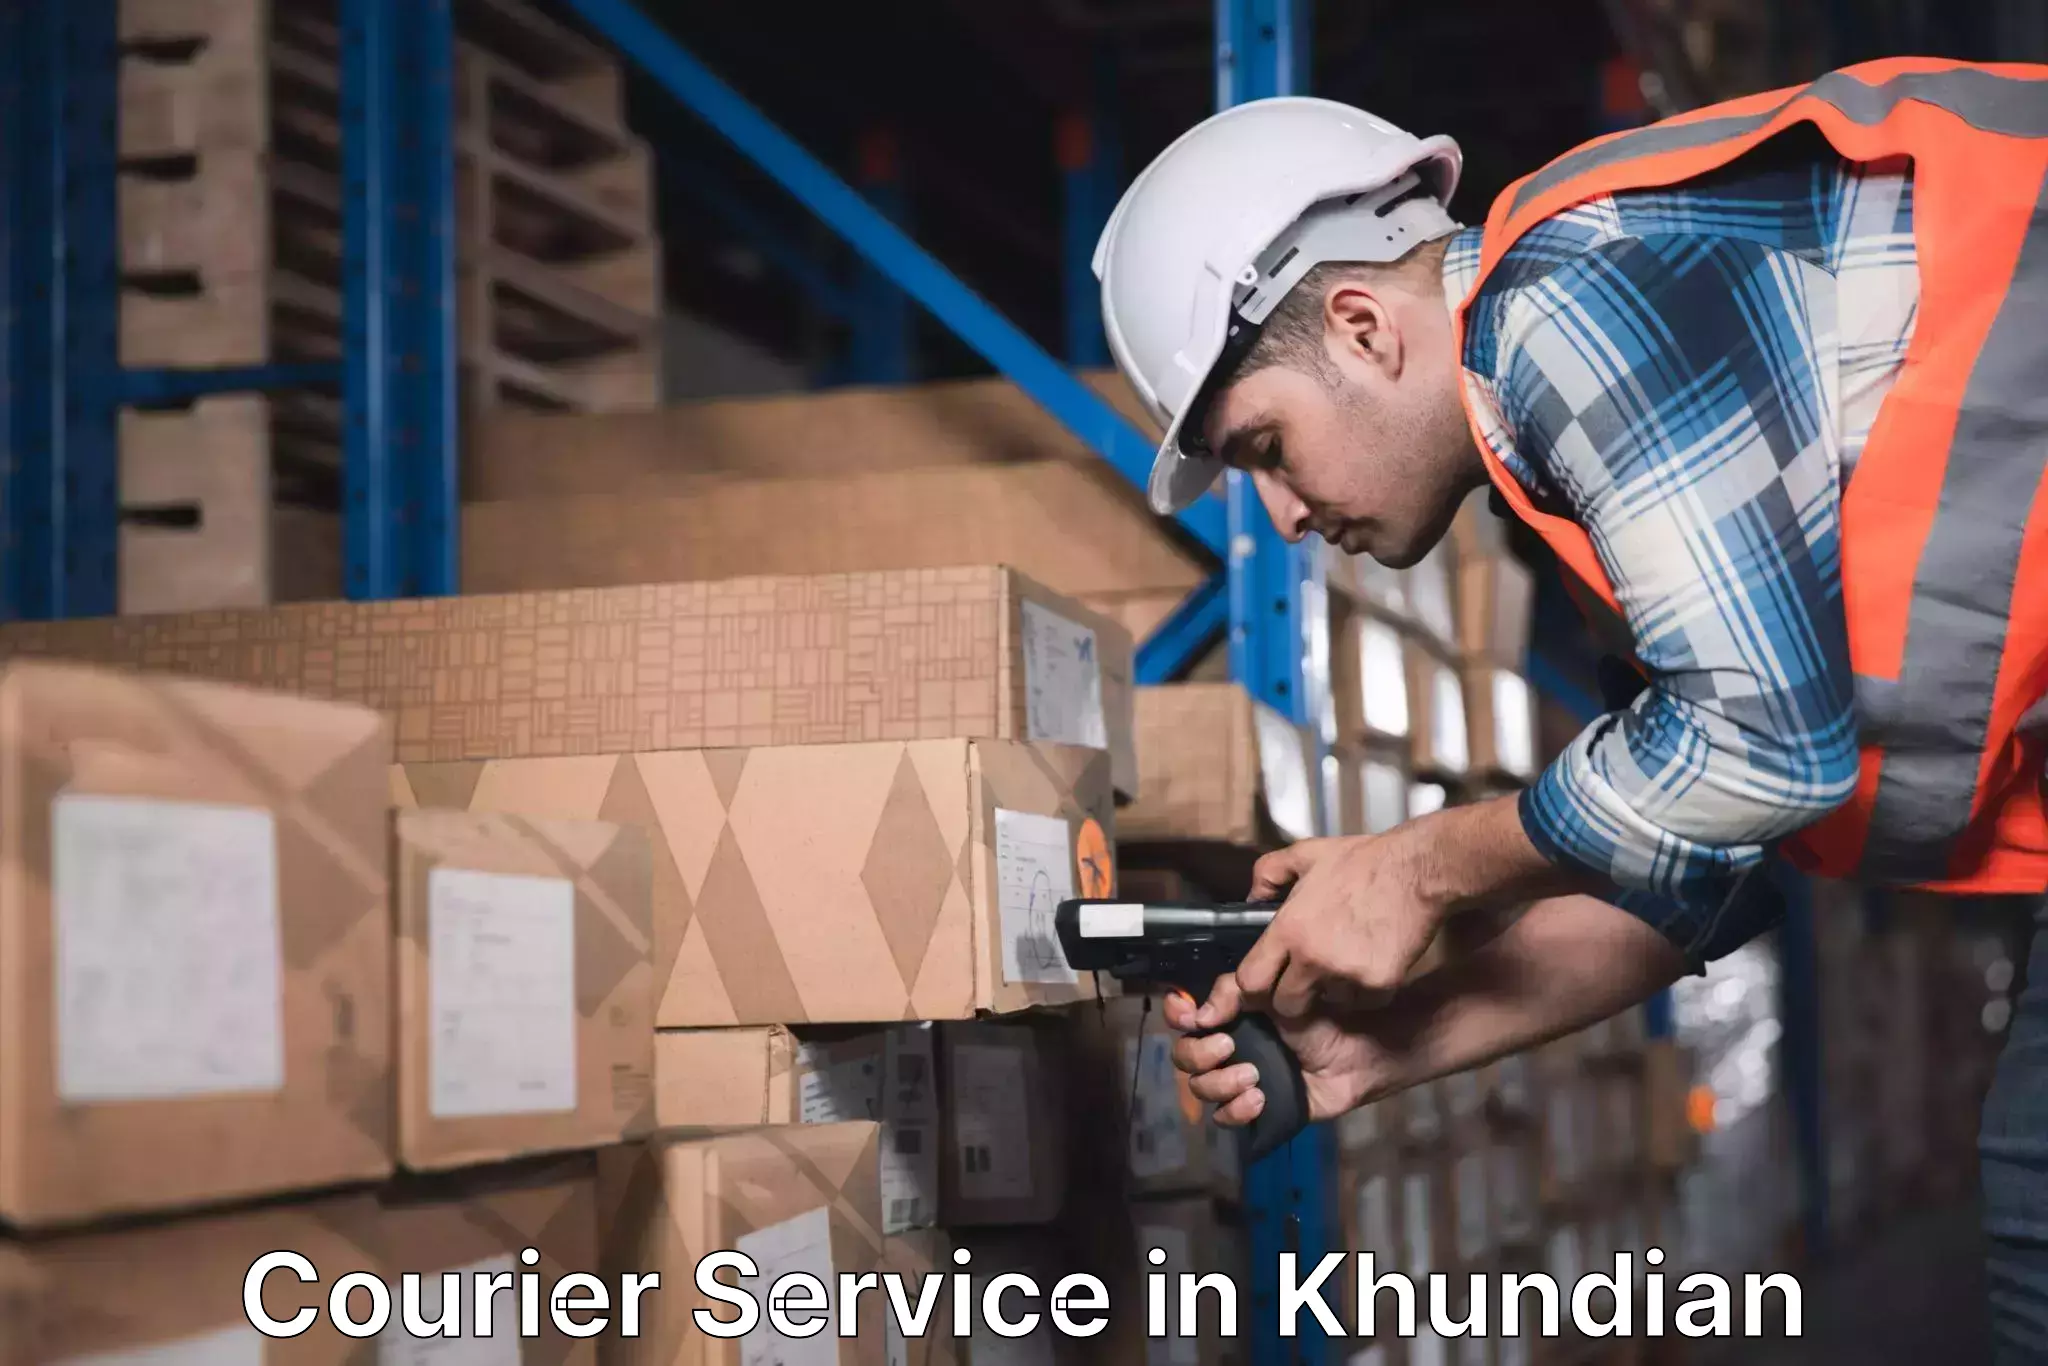 Quick dispatch service in Khundian